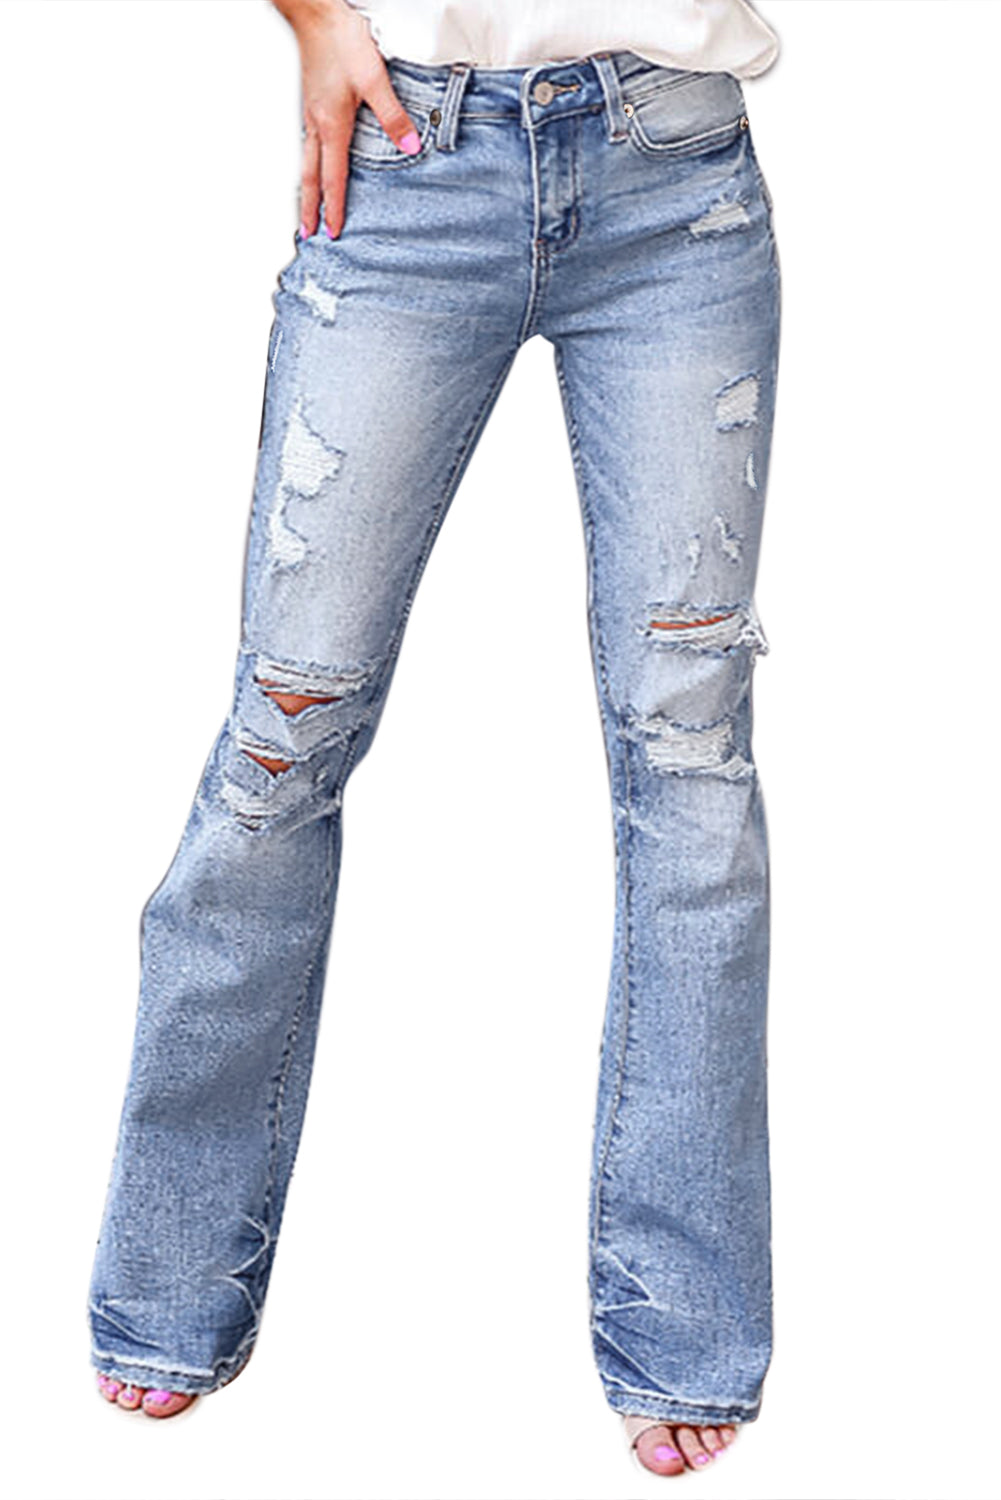 Sky Blue Distressed Mid Waist Ripped Flare Jeans Jeans JT's Designer Fashion